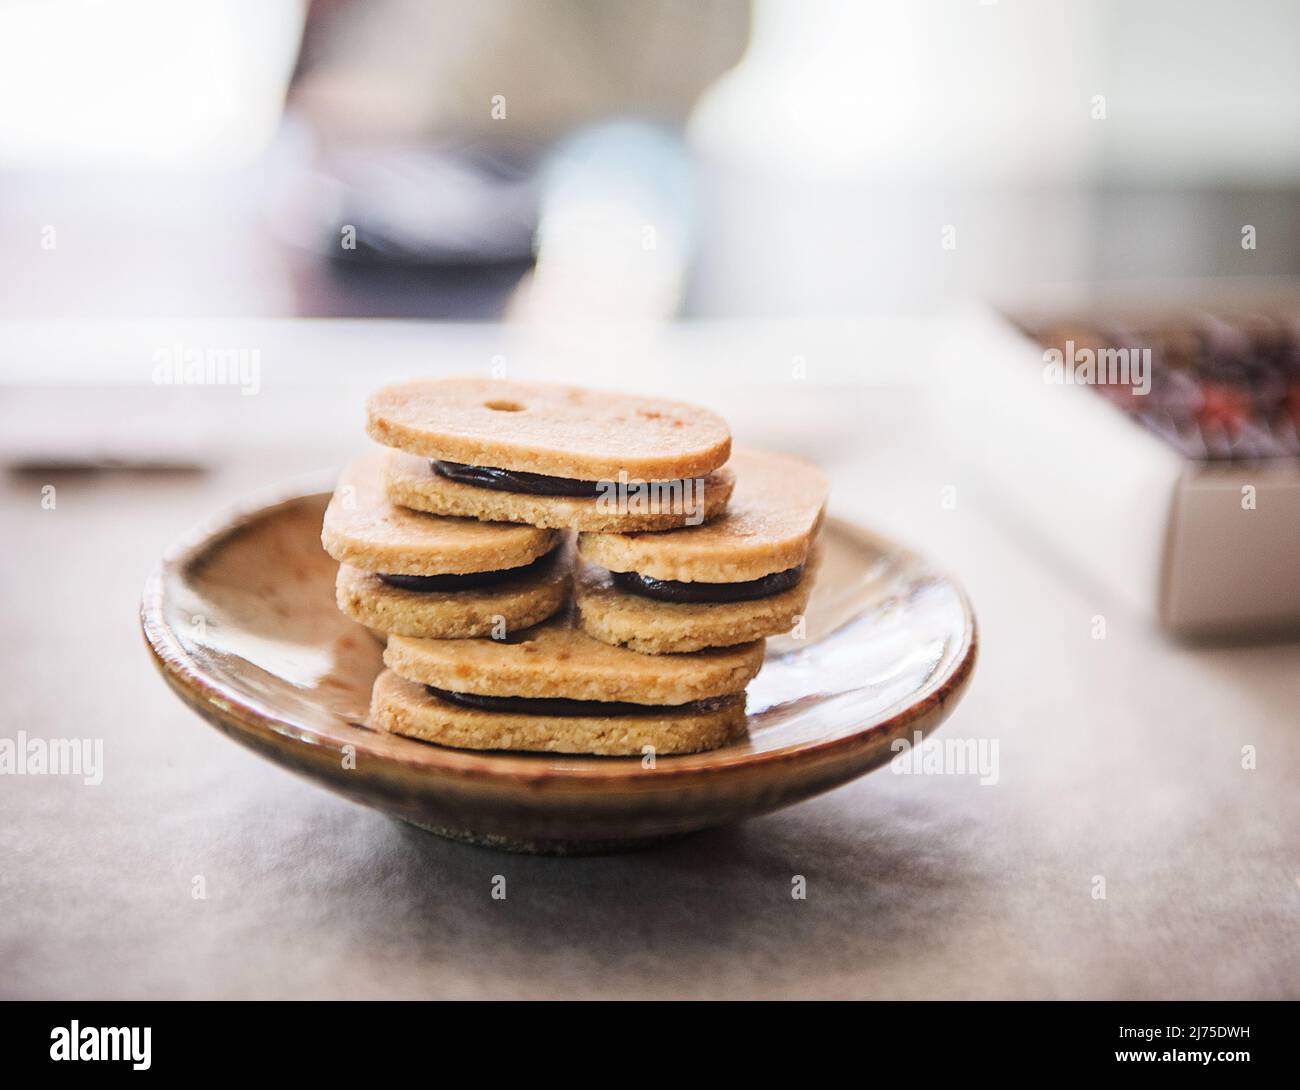 Gourmet cookies with chocolate filling Stock Photo